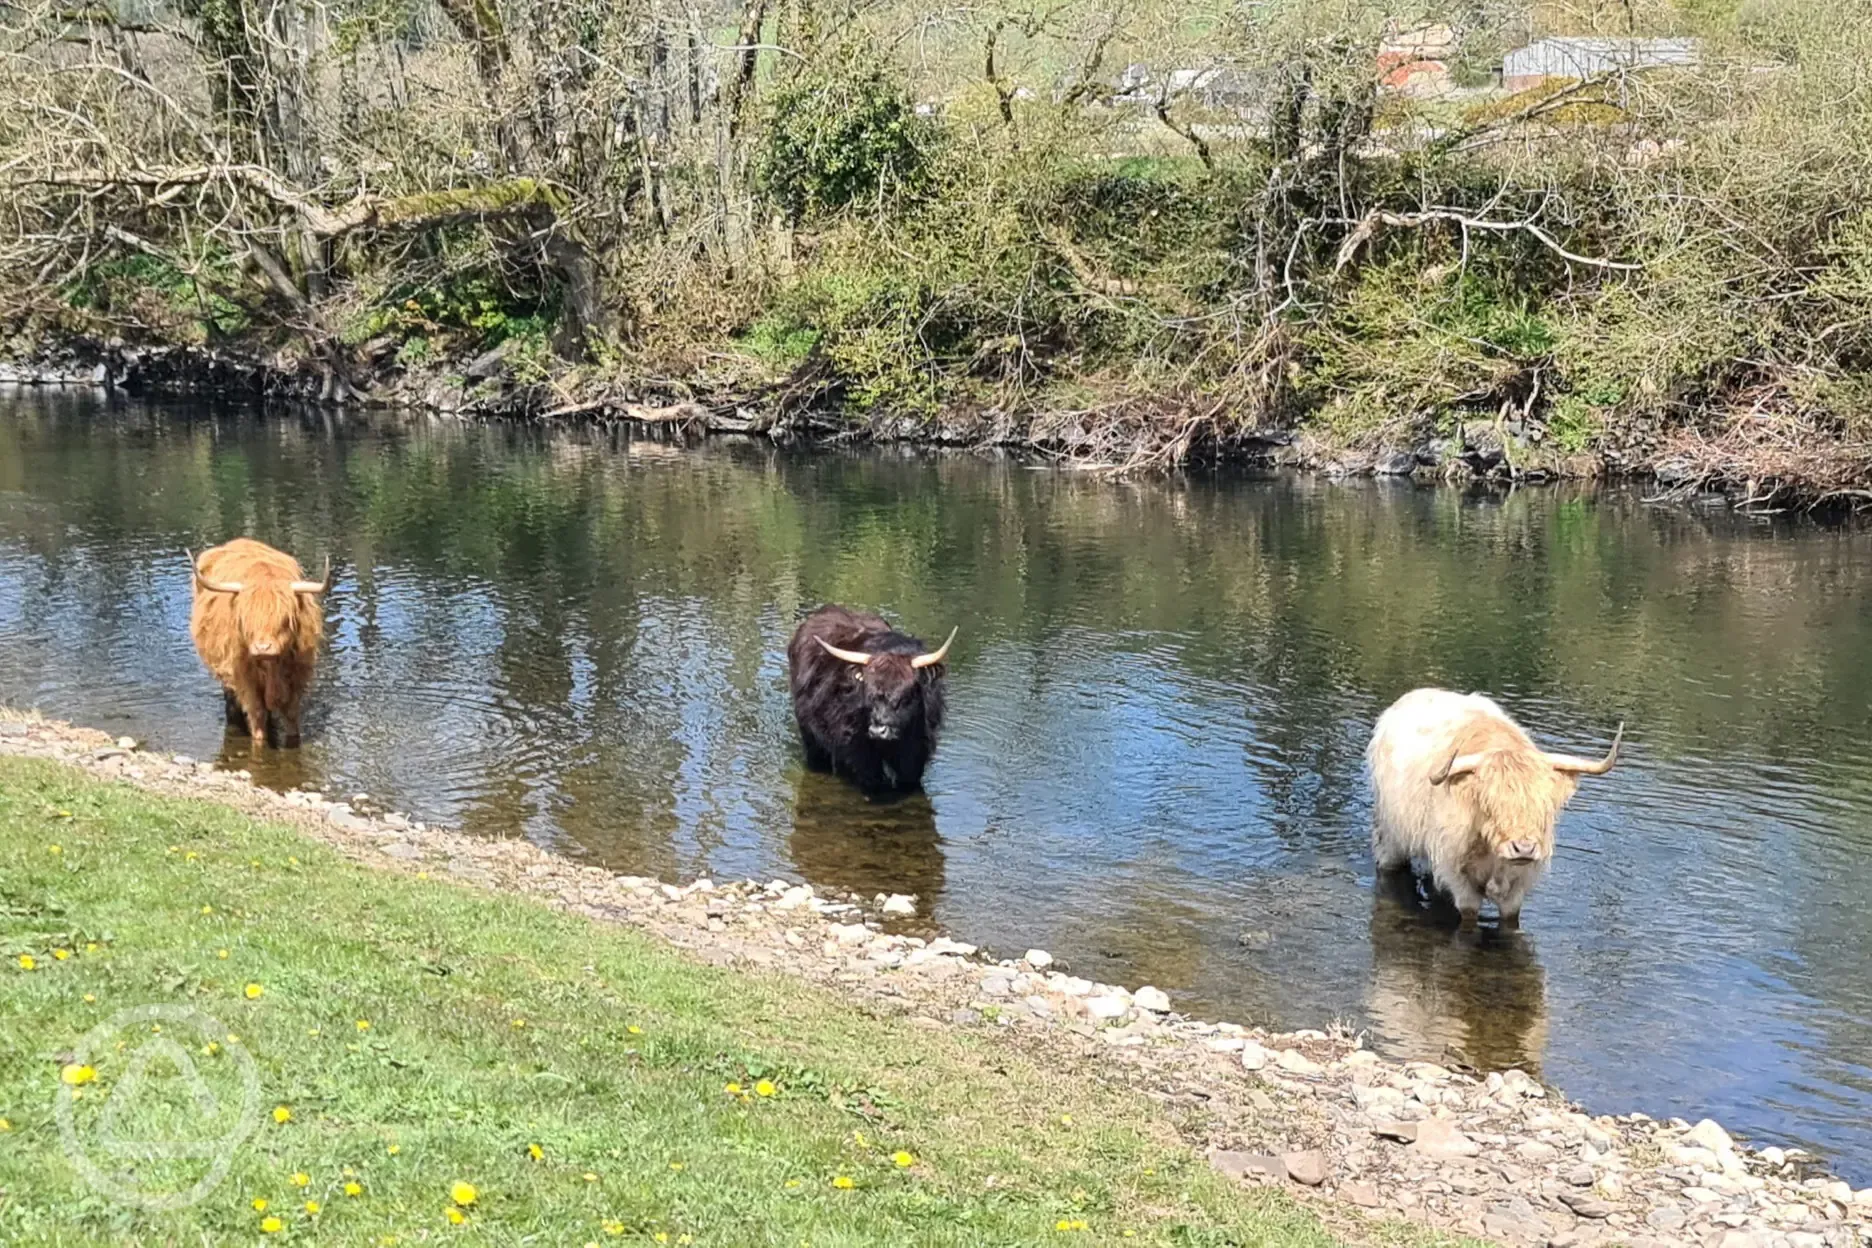 Highland cows in the river